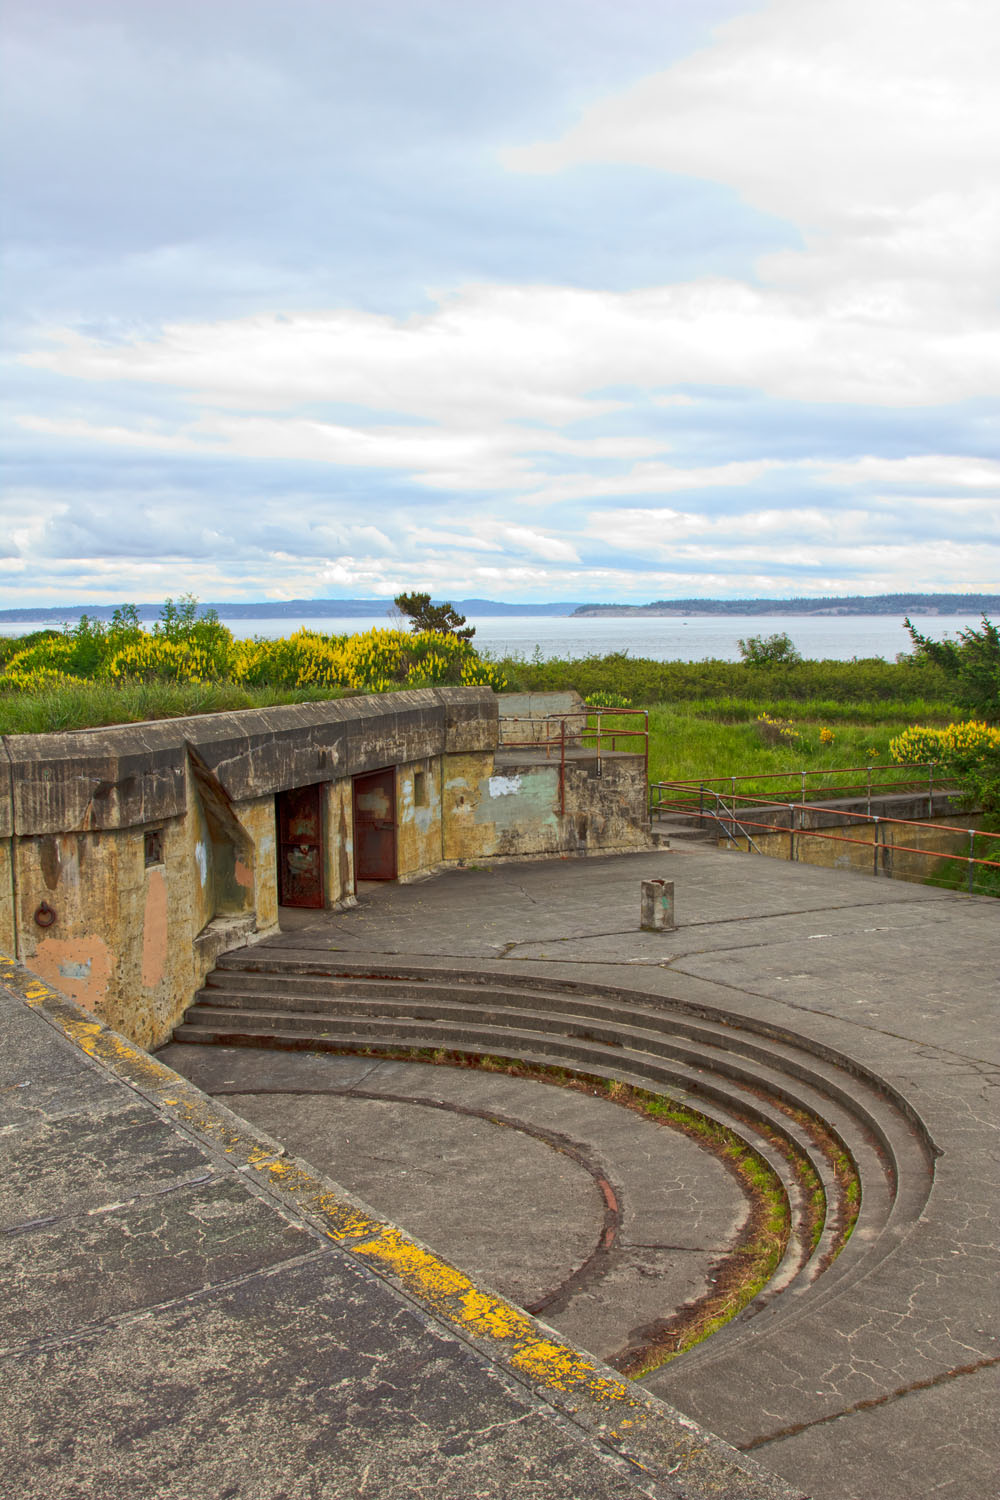 Battery Kinzie at Fort Worden State Park